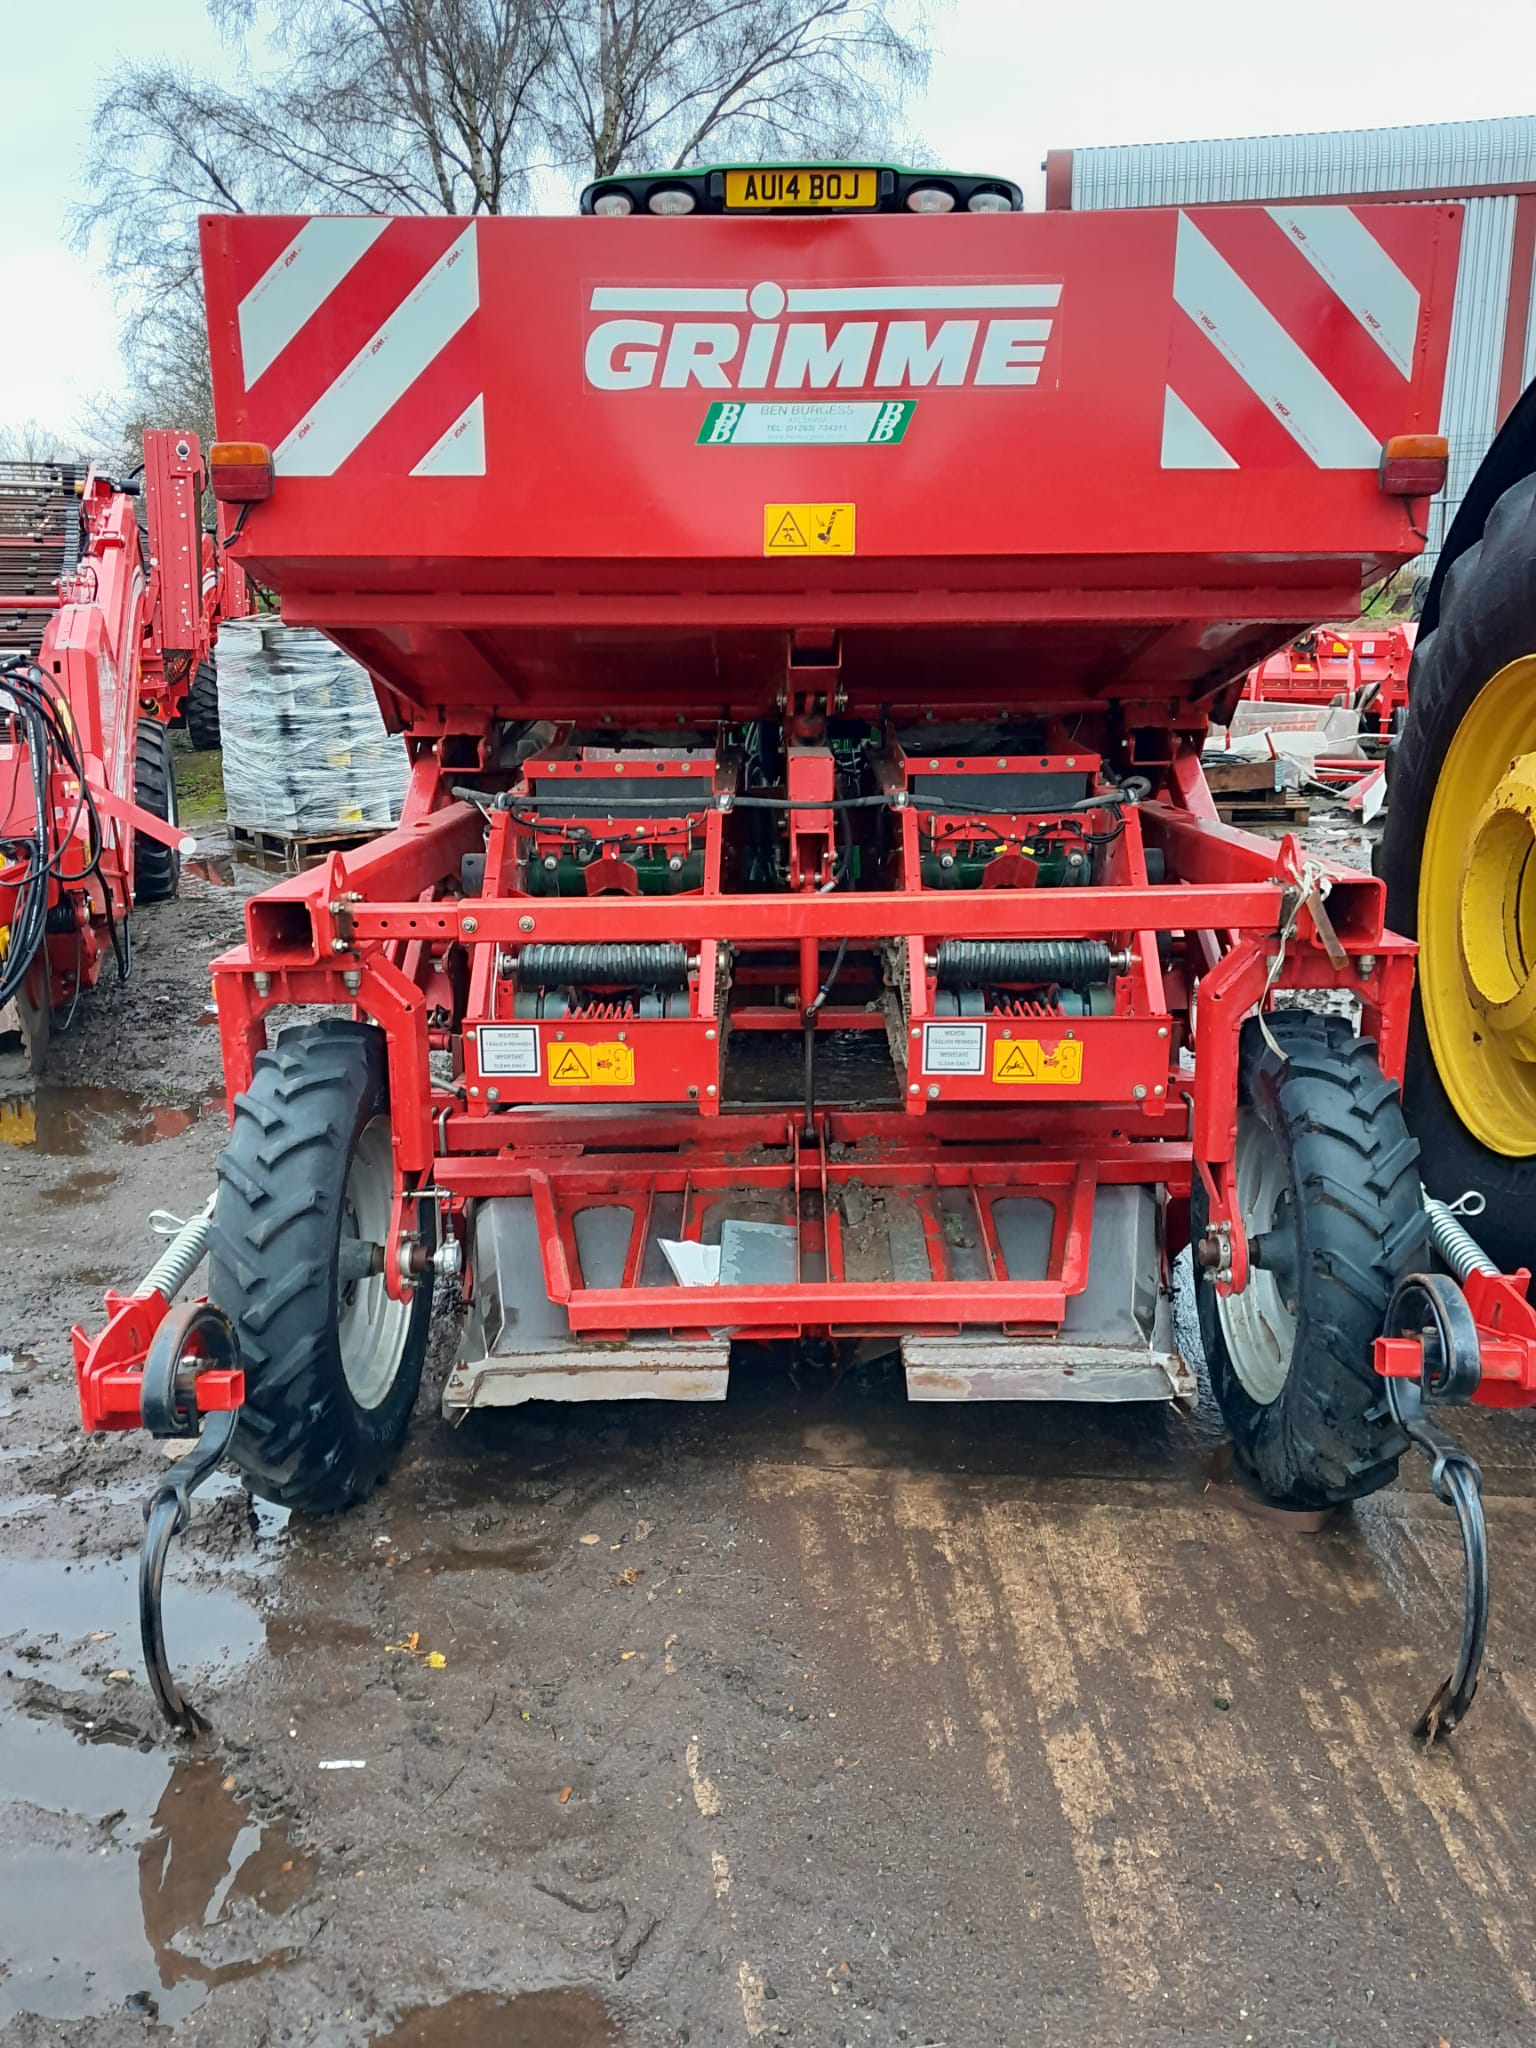 Grimme GB215